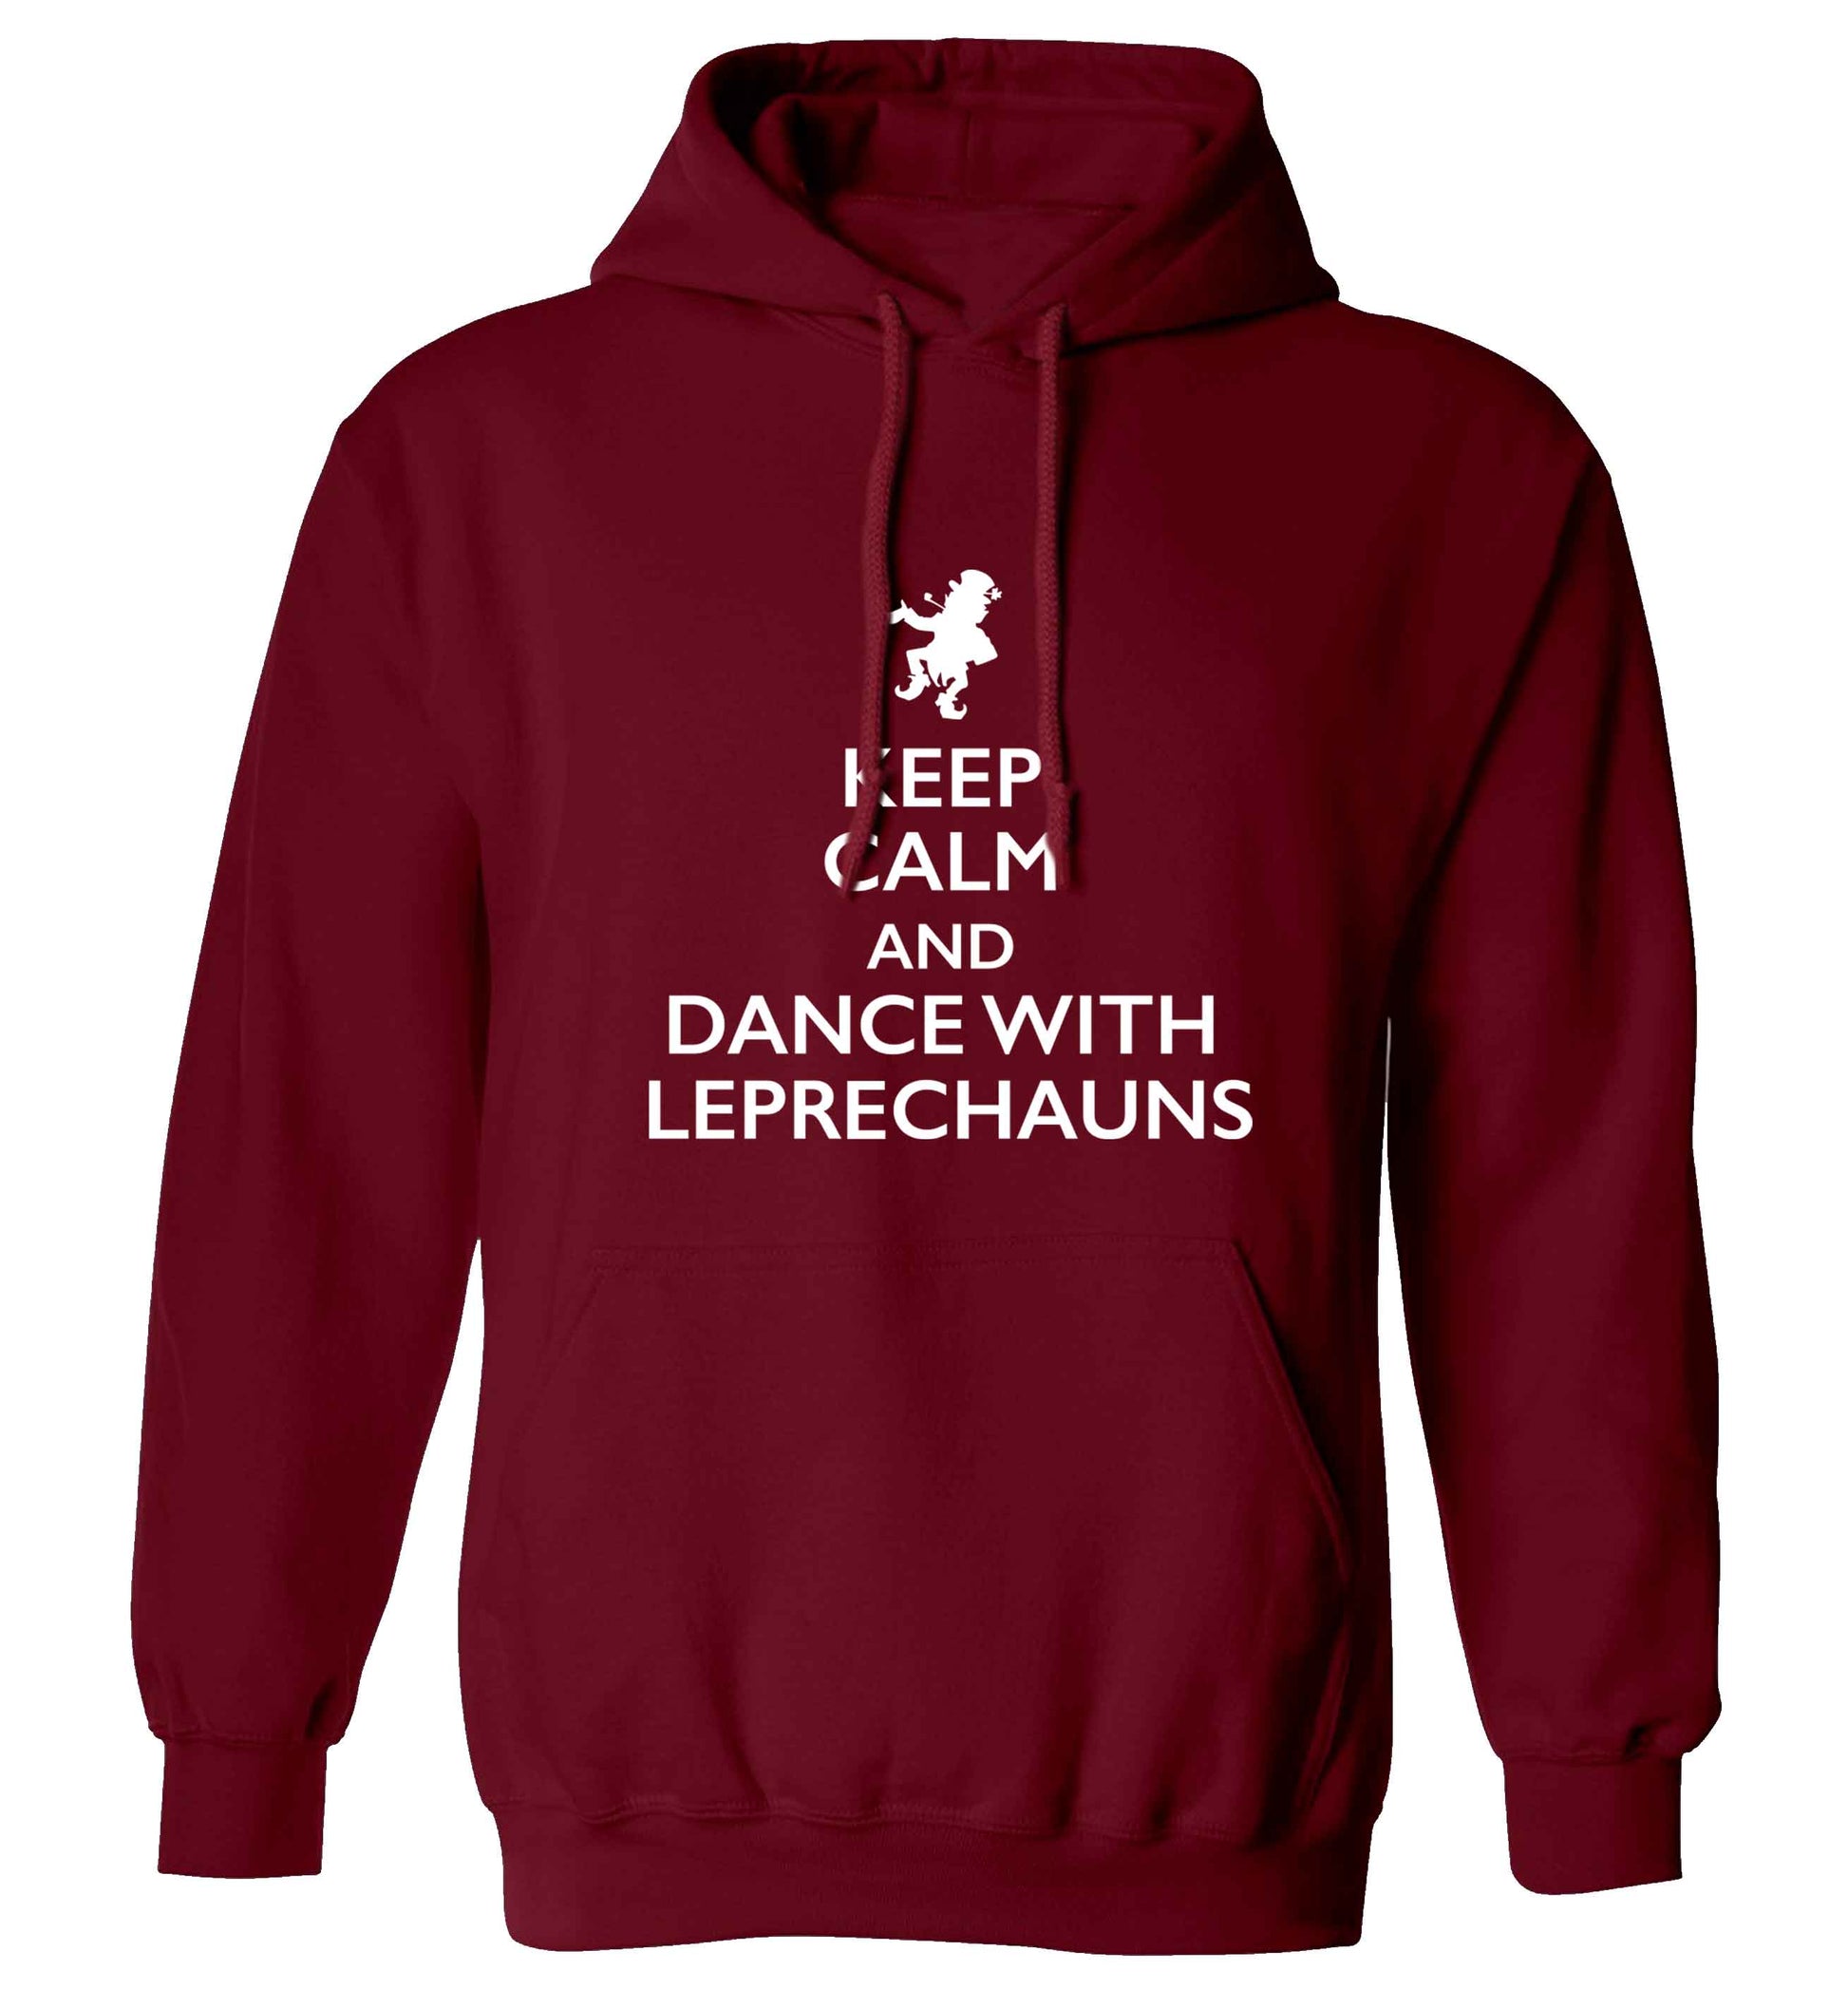 Keep calm and dance with leprechauns adults unisex maroon hoodie 2XL